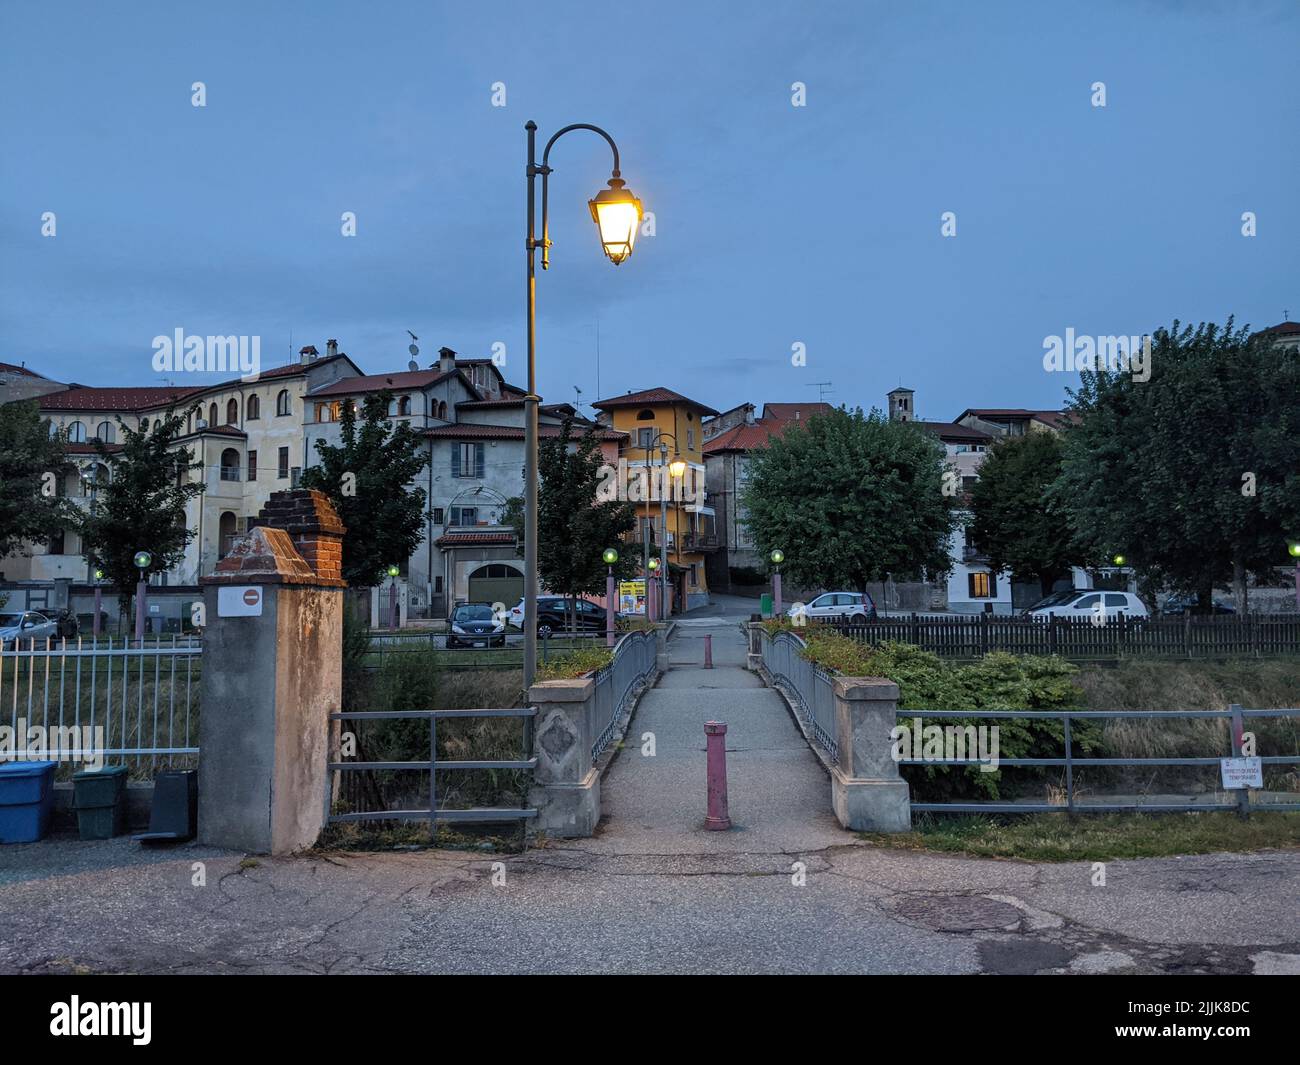 A beautiful view of Romagnano Sesia by night, Italy Stock Photo